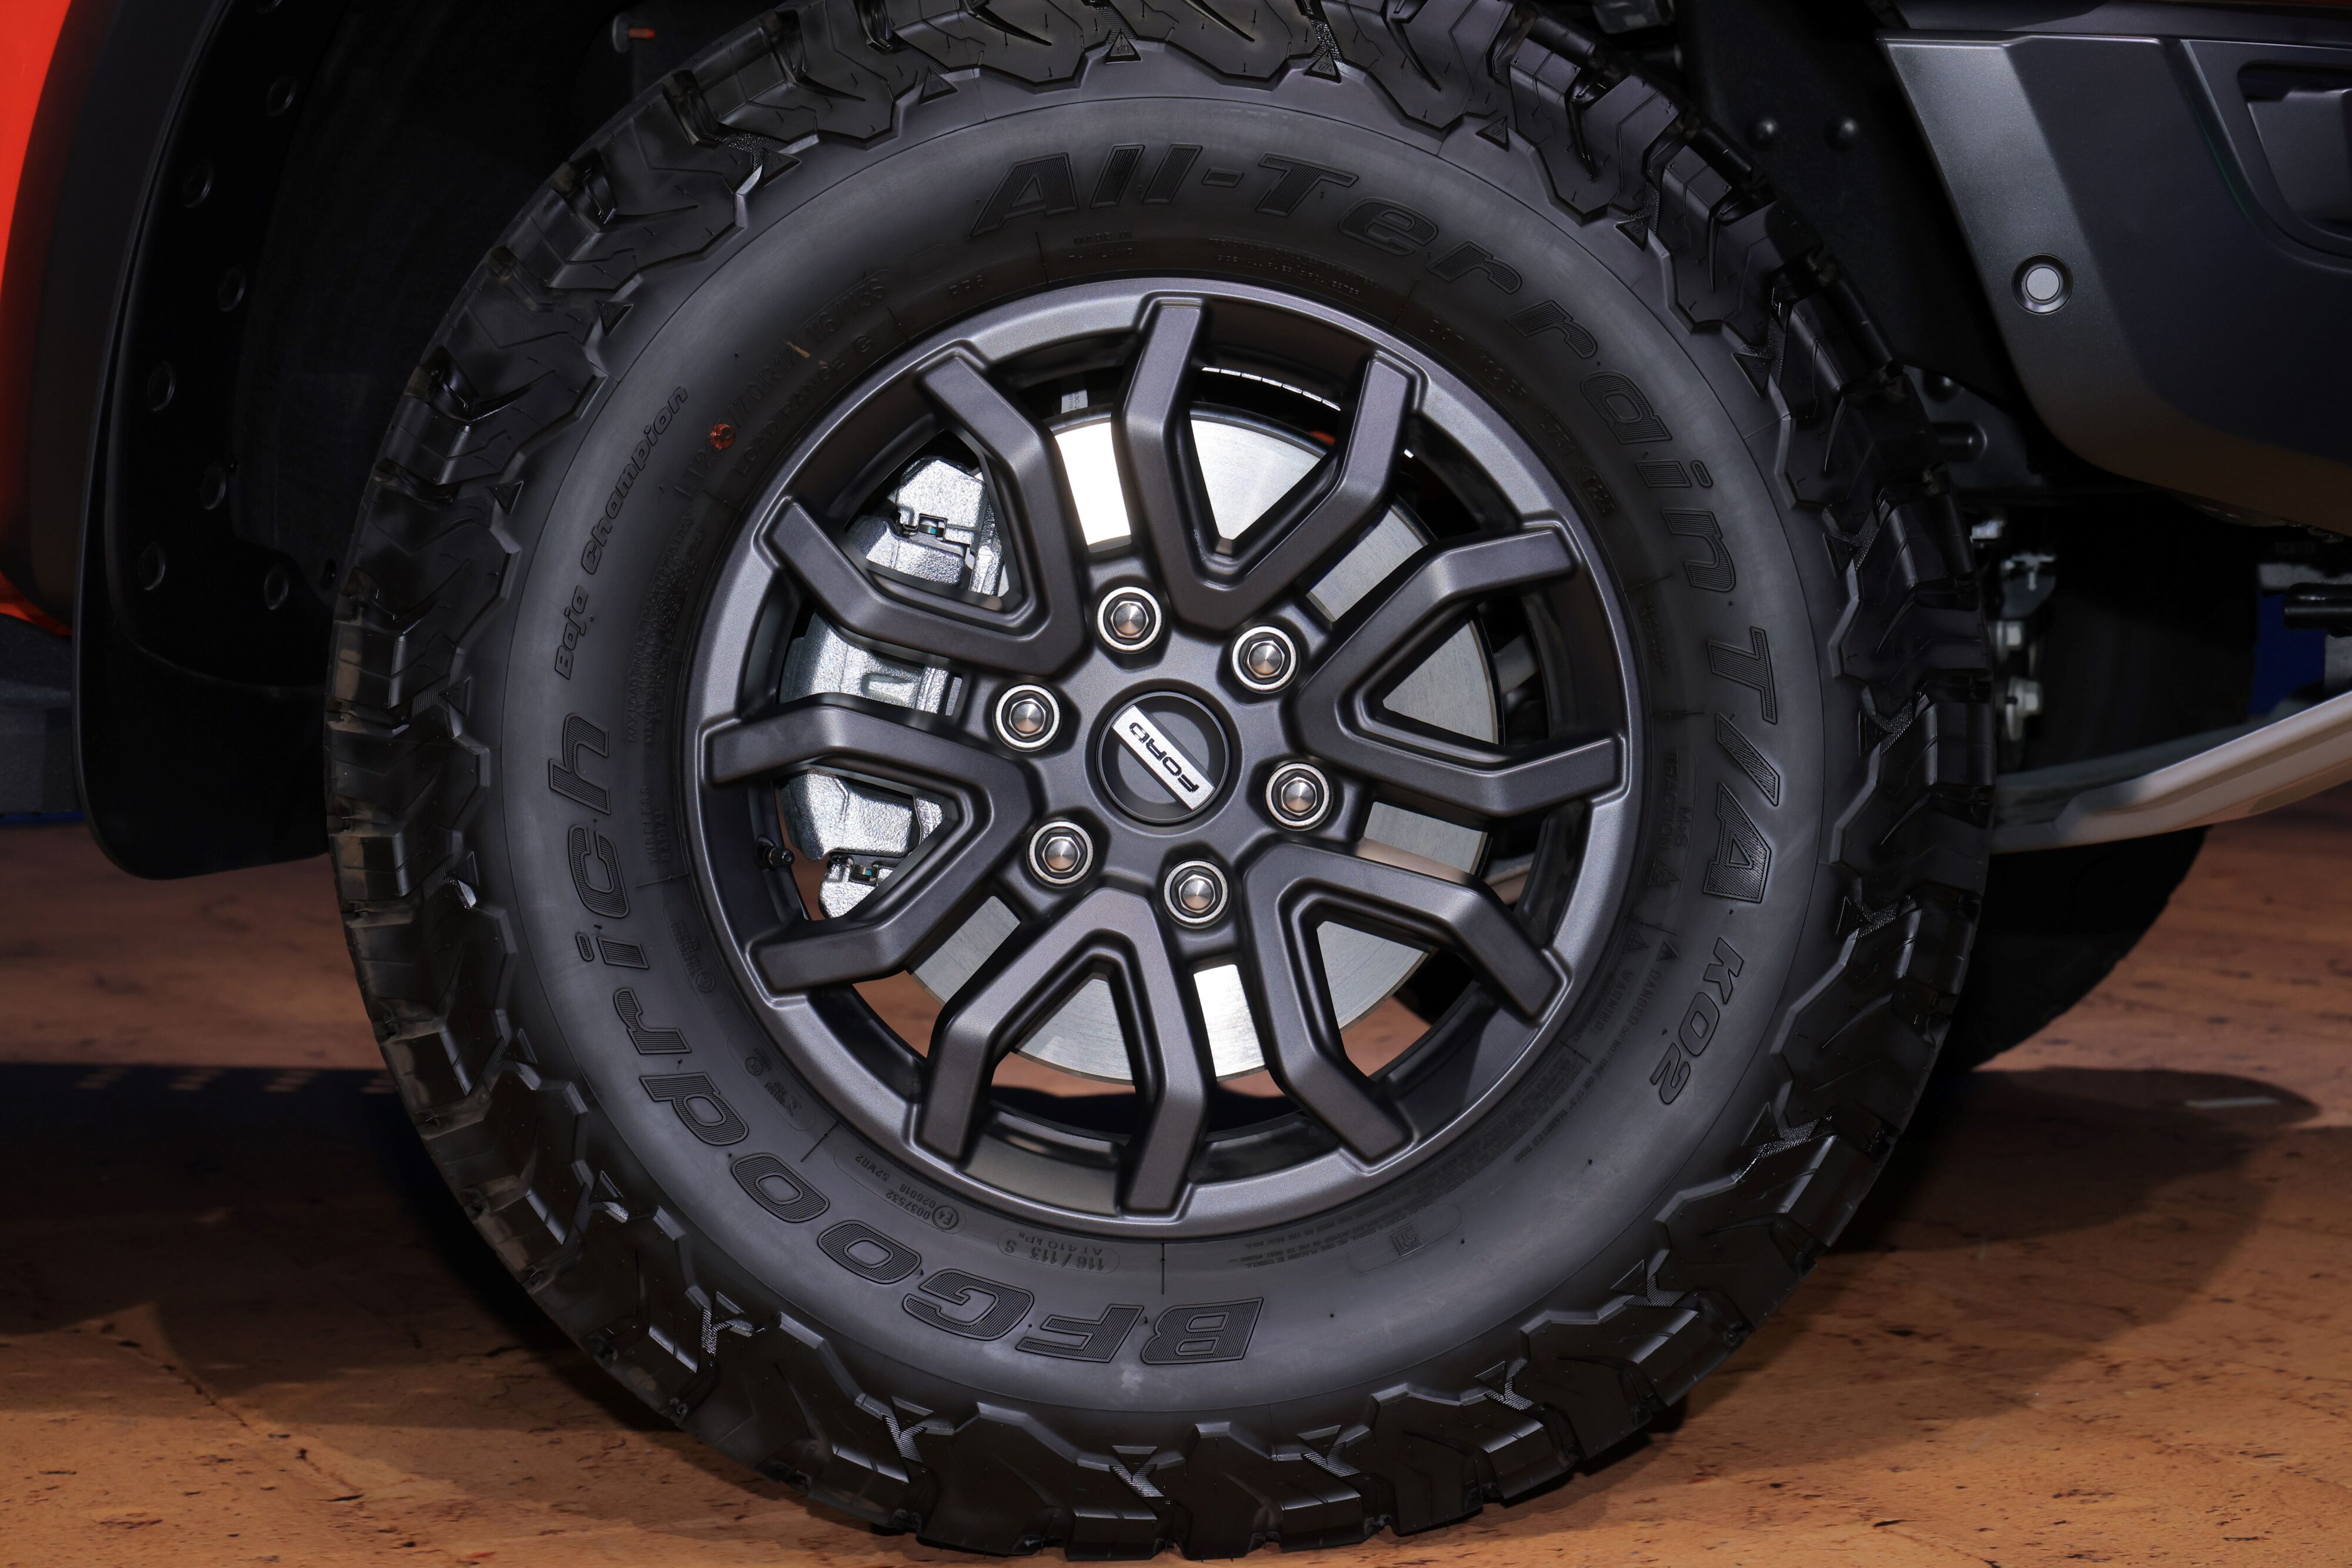 Face on view of the 17 inch wheels shod with BF-Goodrich All-Terrain tyres on the Ford Ranger Raptor BiTurbo Diesel